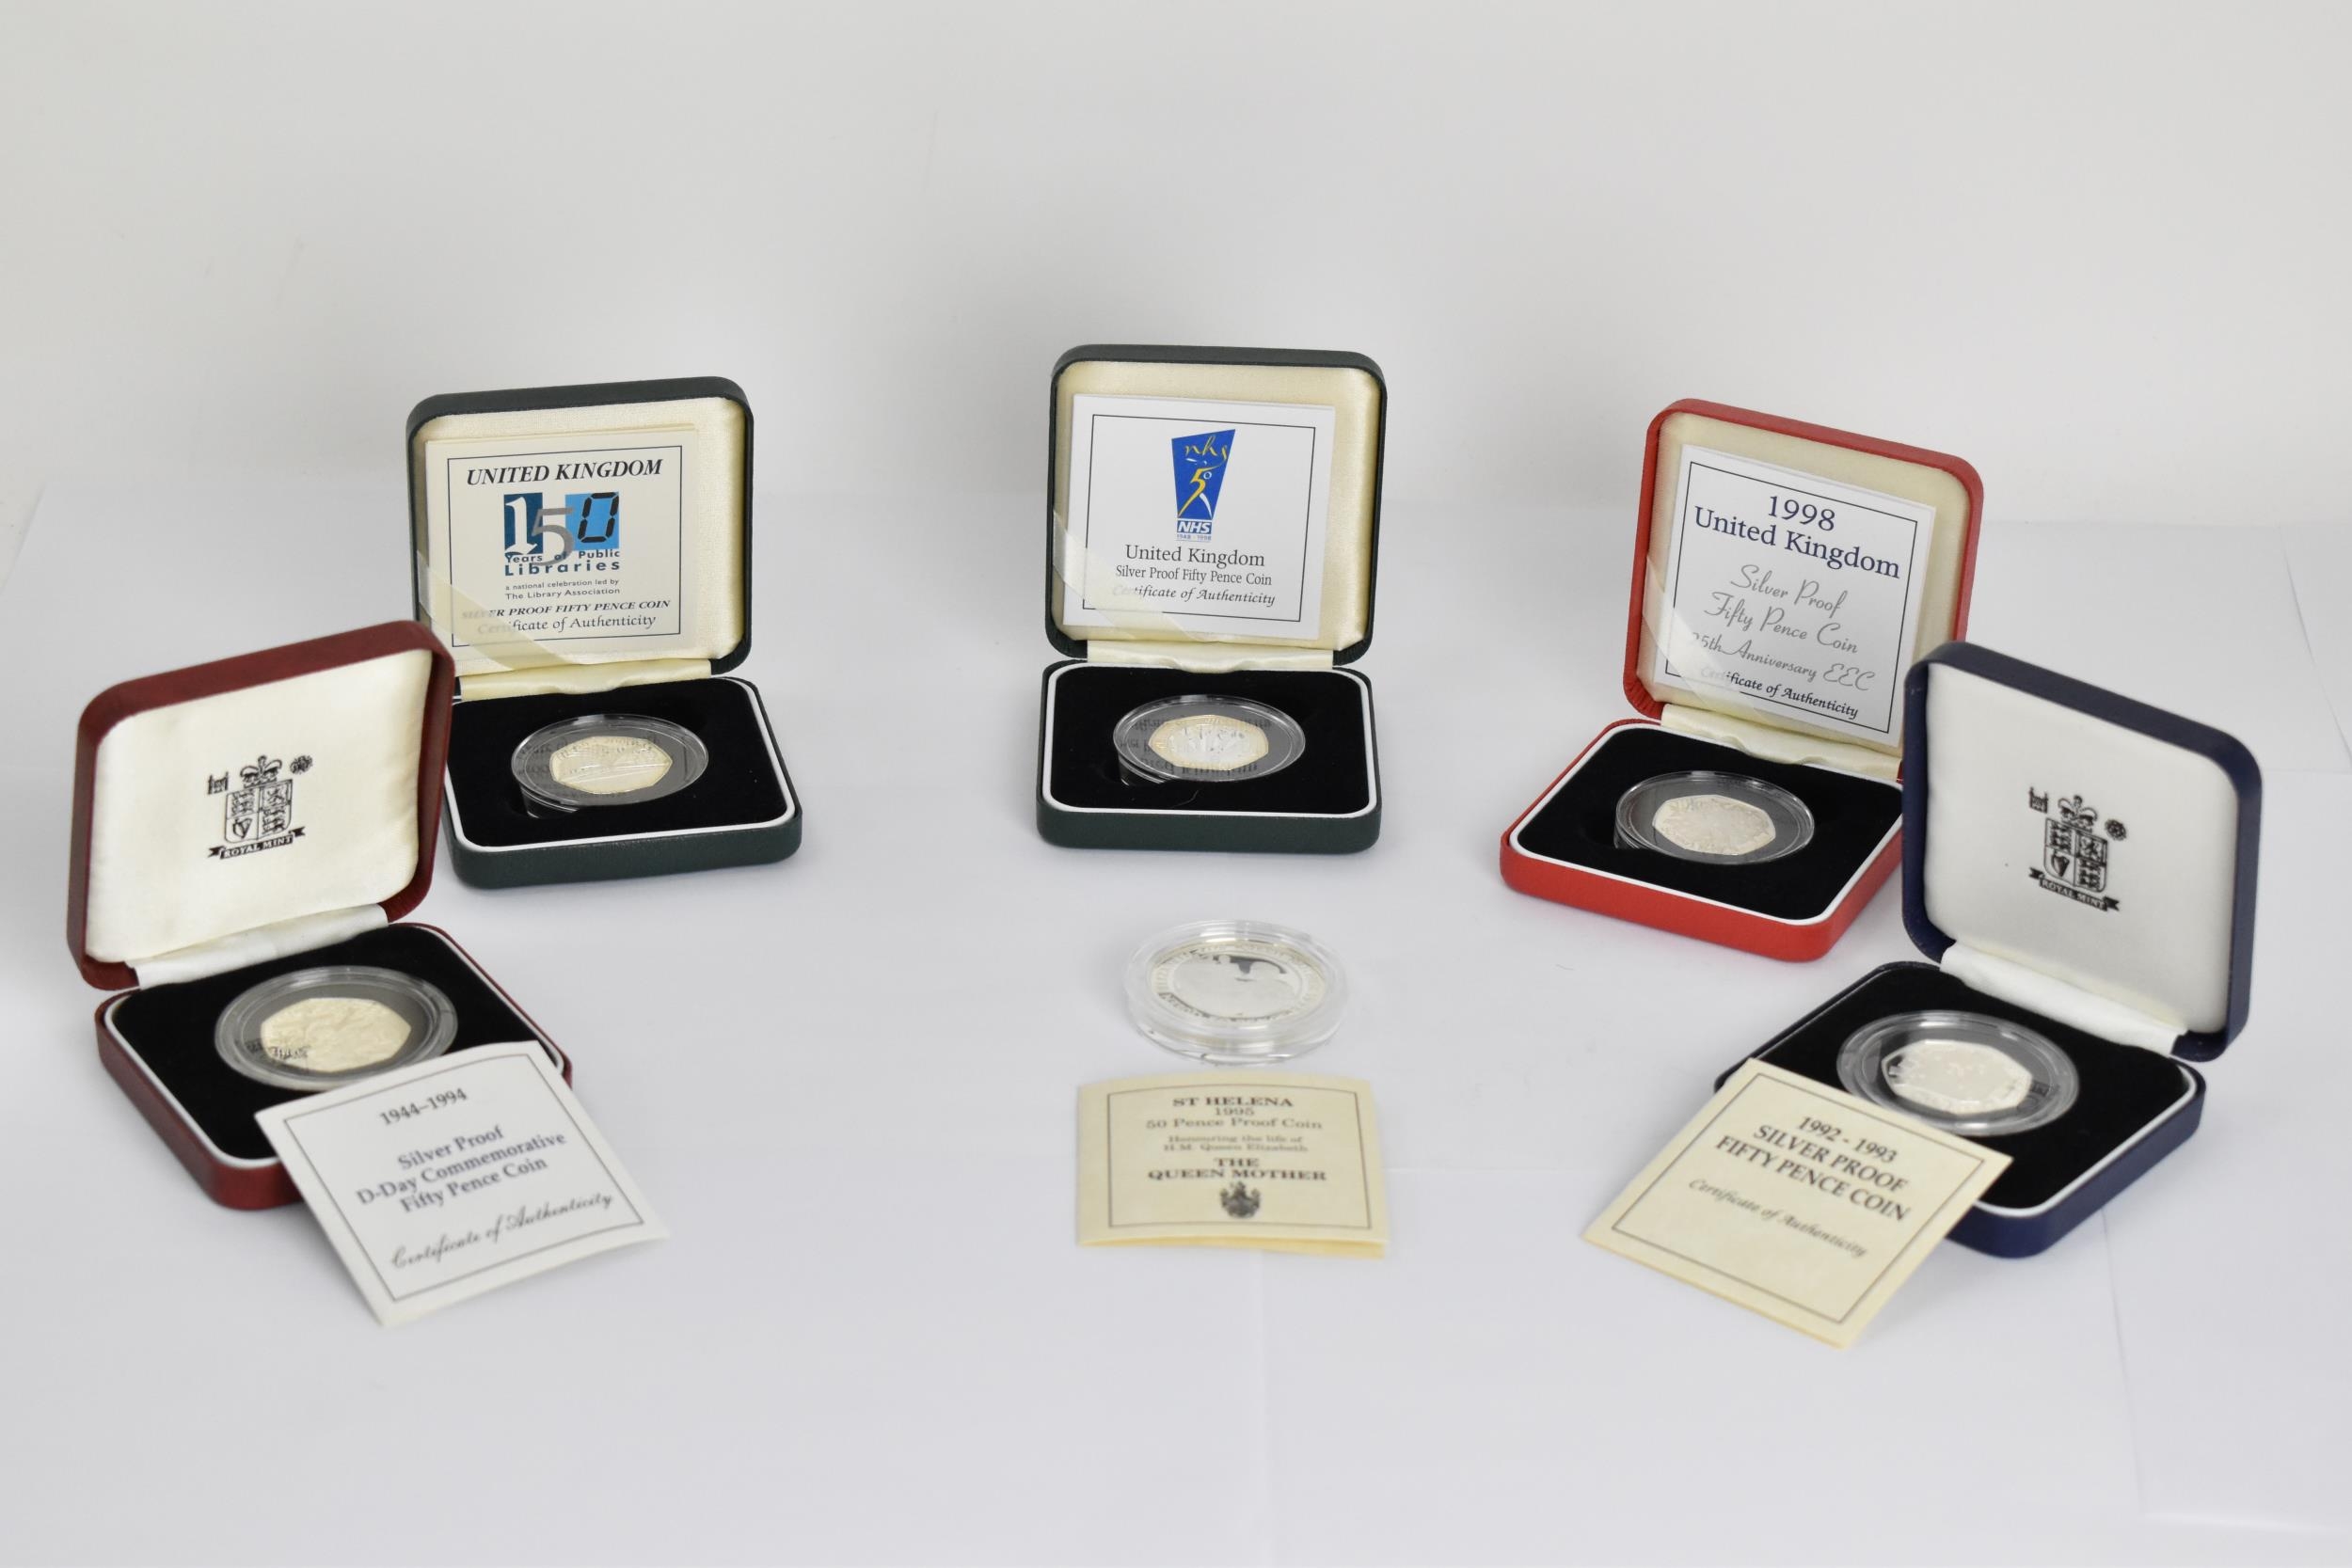 A collection of 6 Royal Mind silver proof Fifty Pence coins to include the 1992-1993 ?United